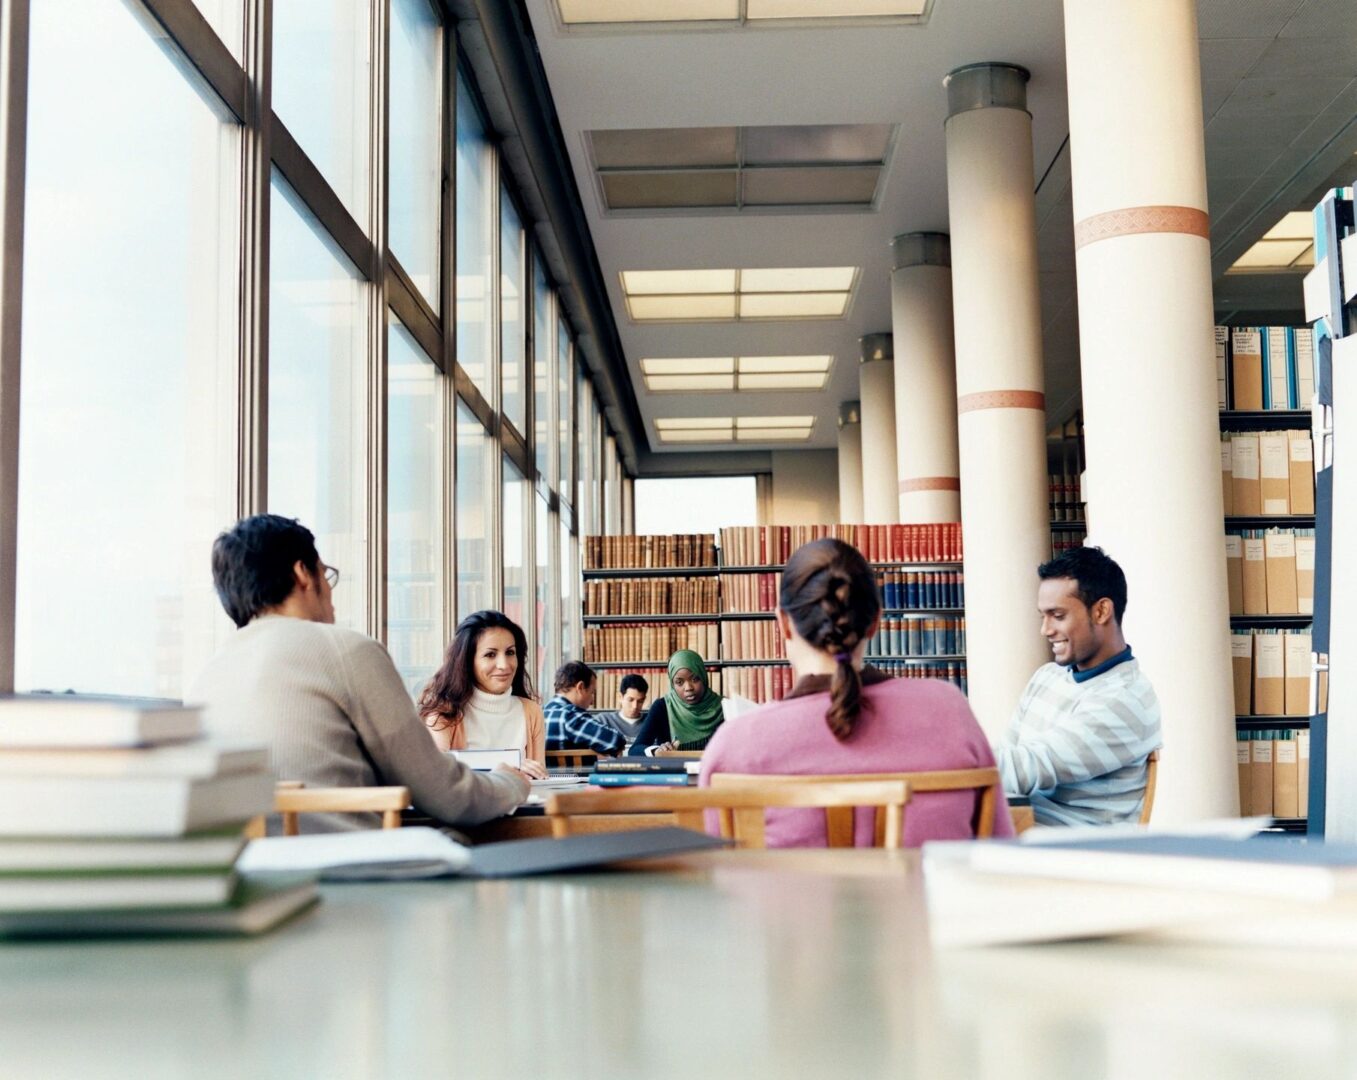 A diverse group of students meeting in a library.